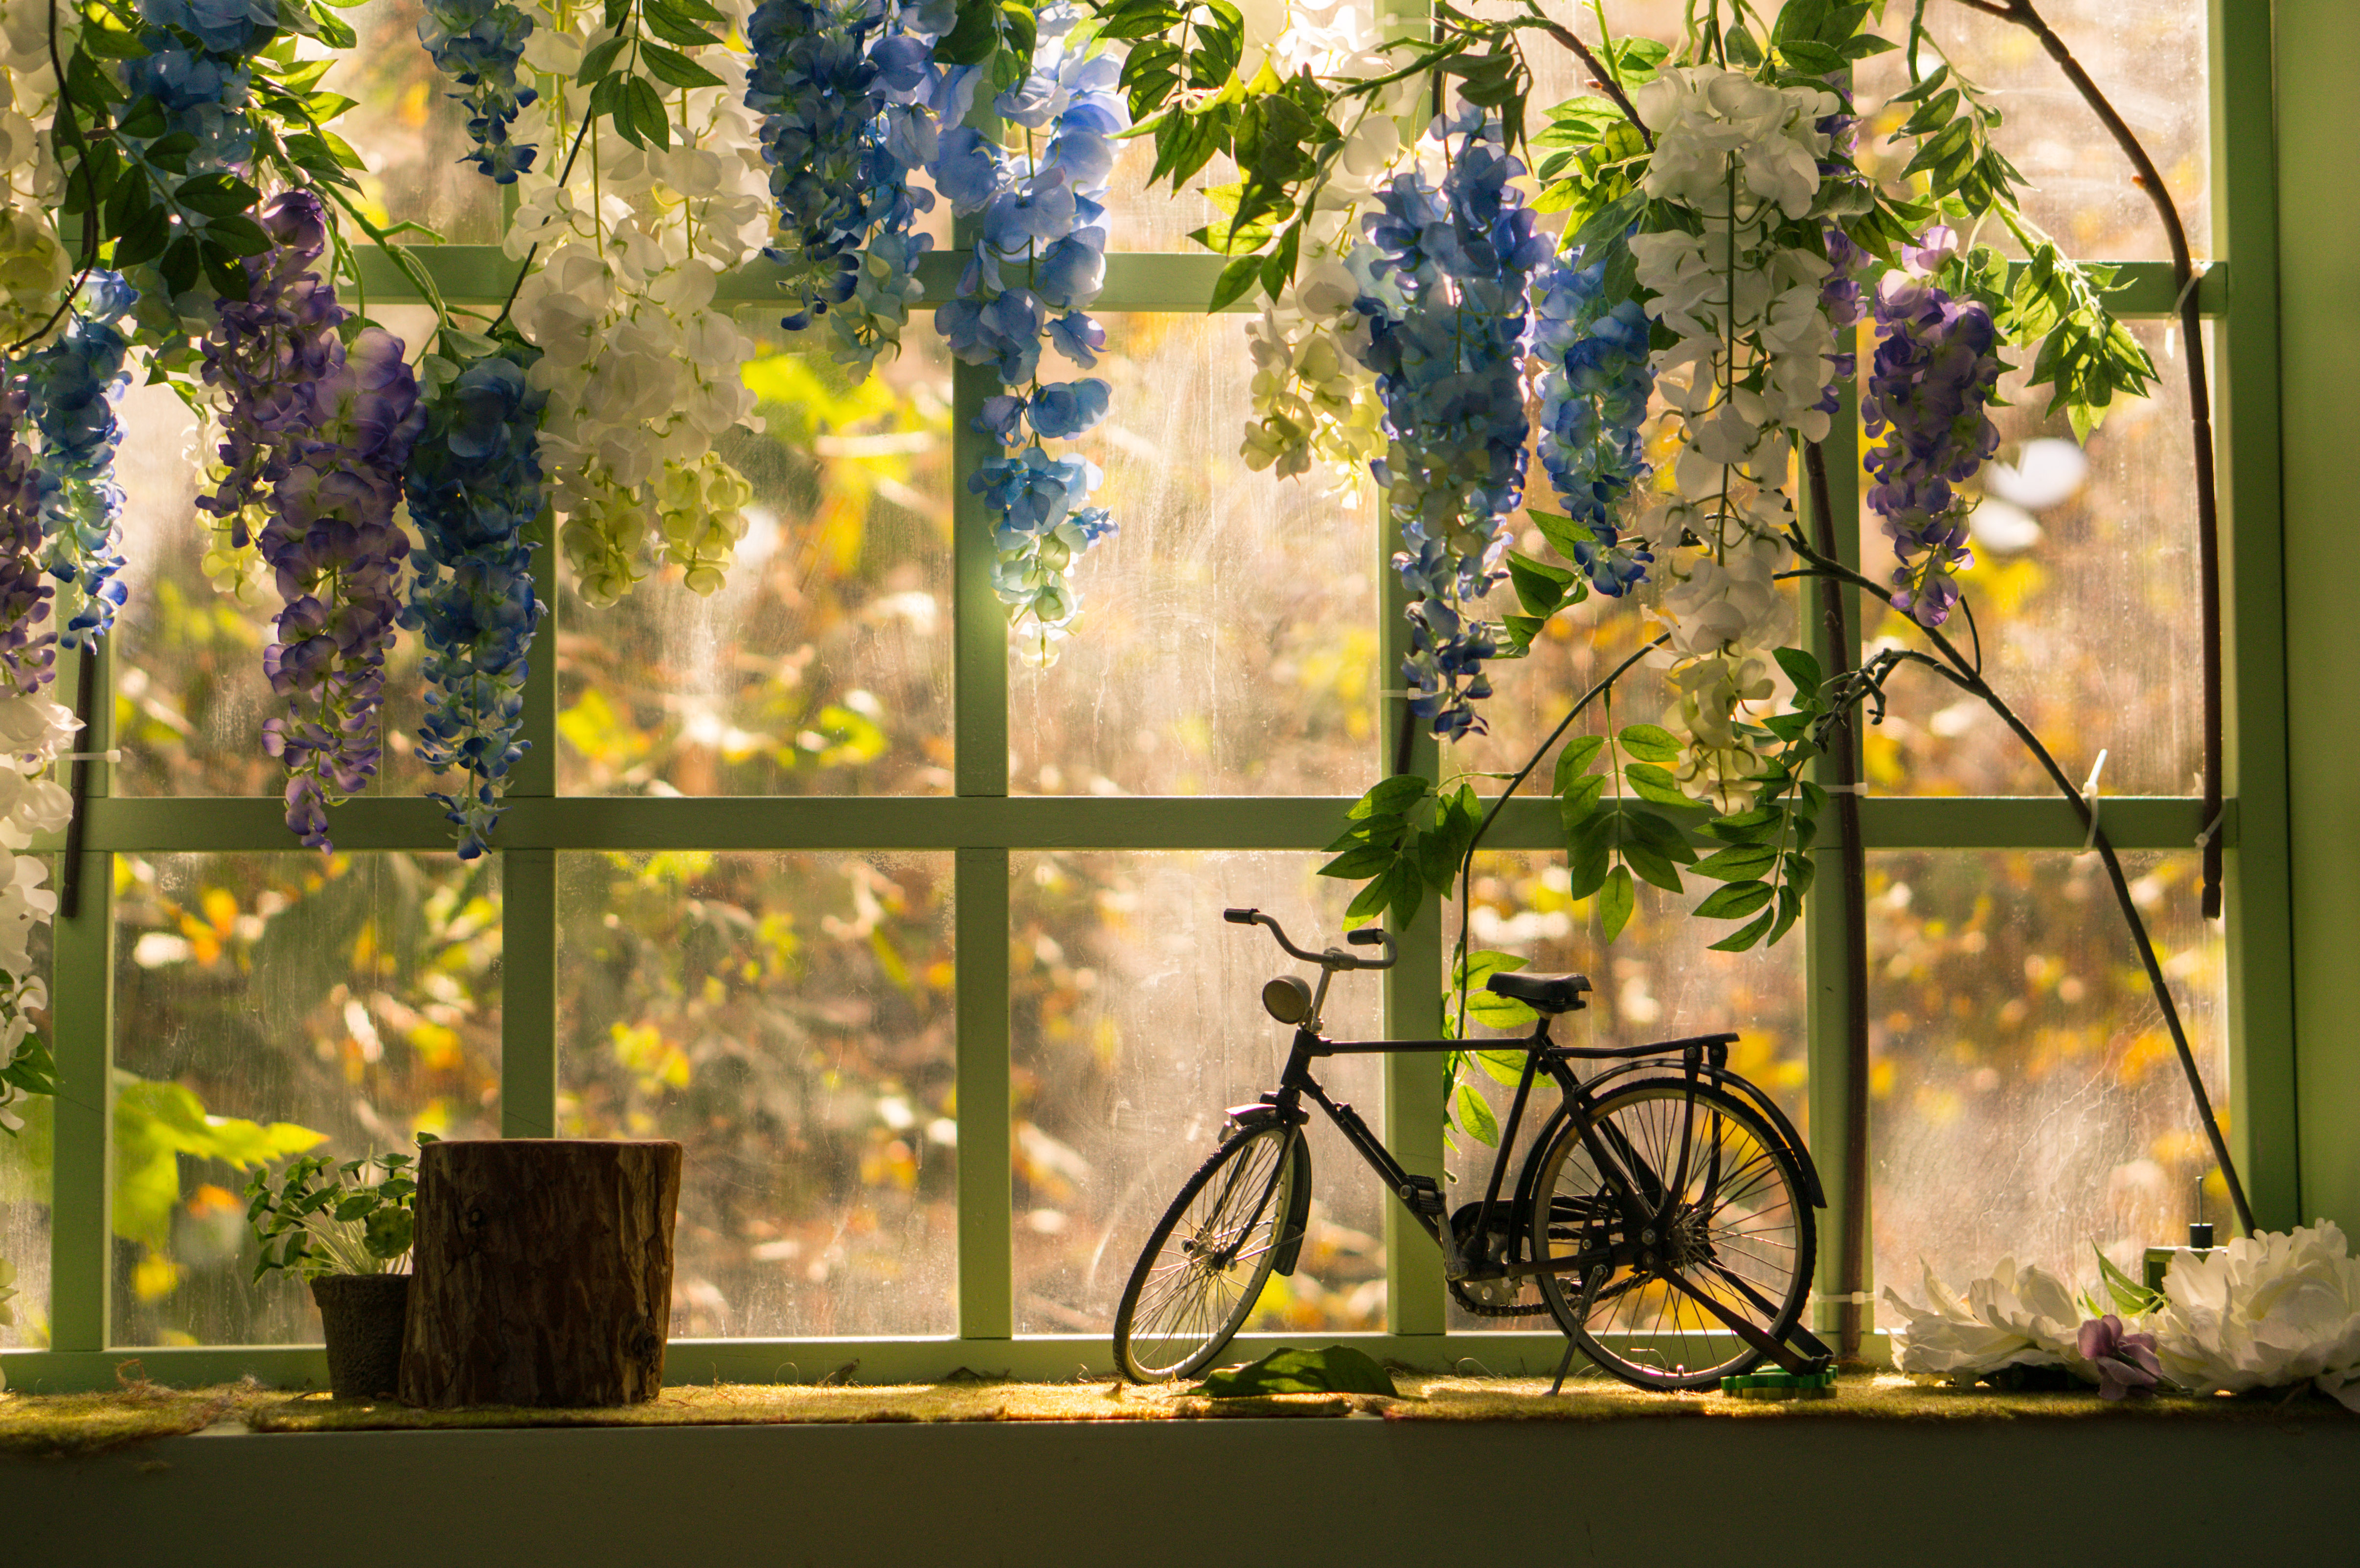 78371 Screensavers and Wallpapers Bicycle for phone. Download flowers, miscellanea, miscellaneous, window, statuette, bicycle pictures for free